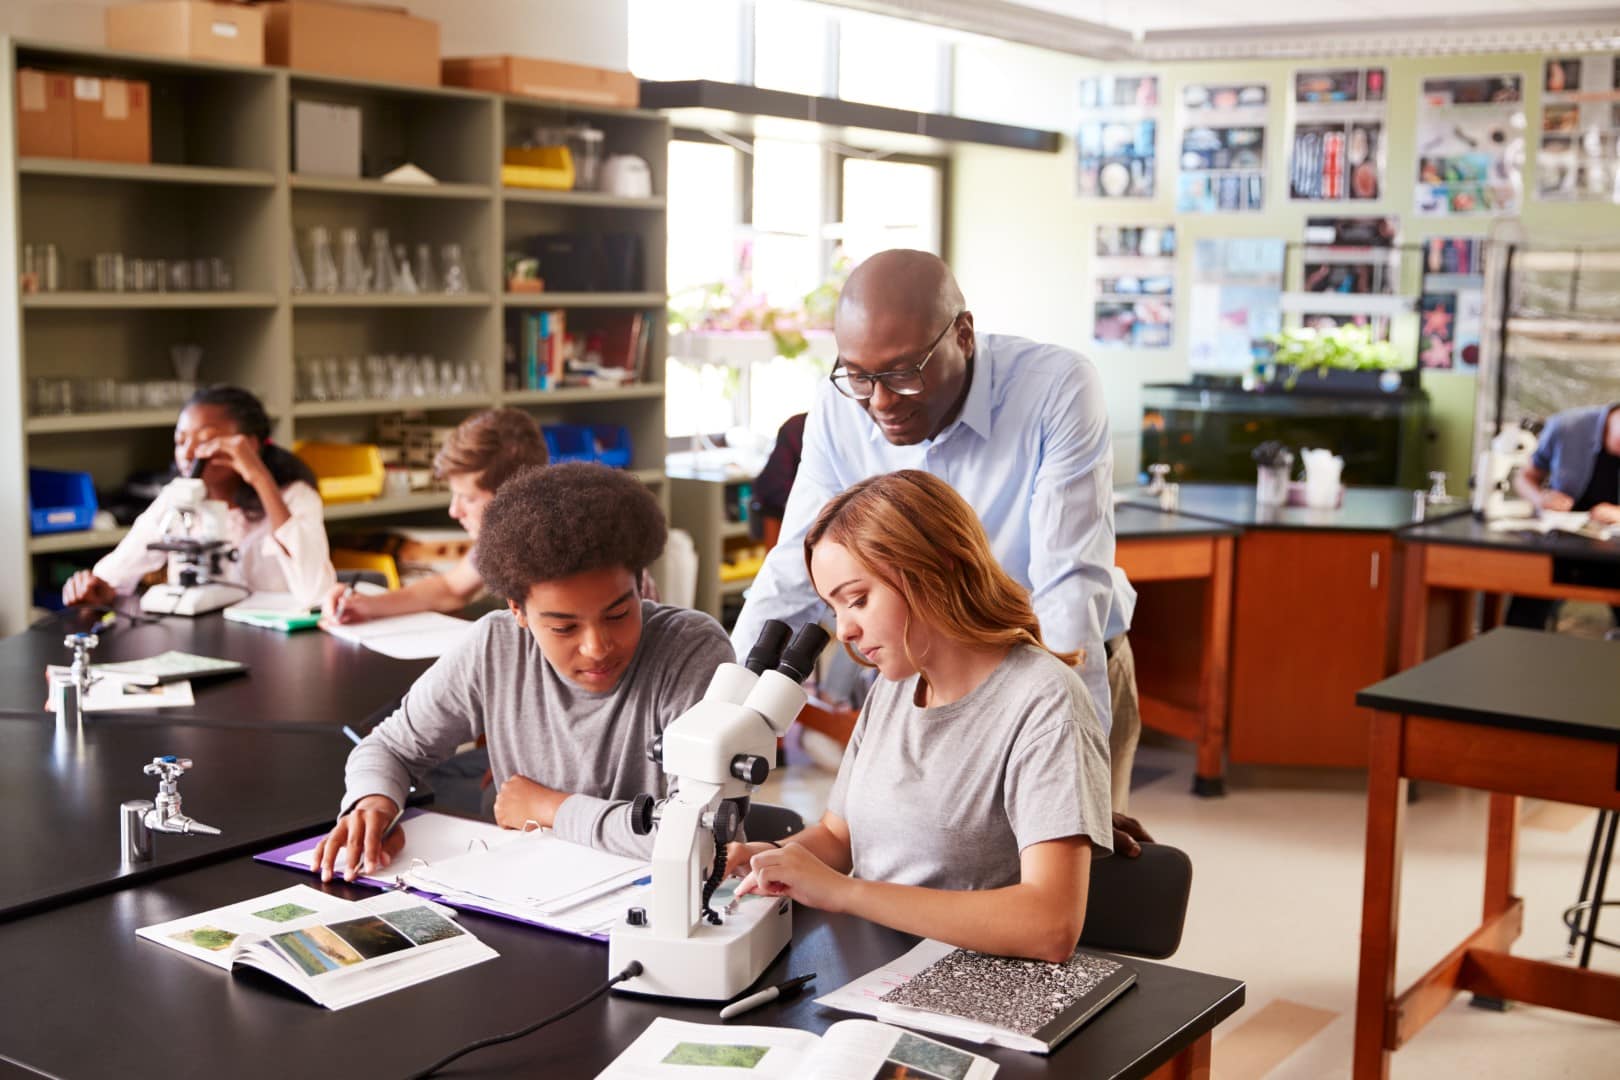 High school students with teacher using microscope in science class.